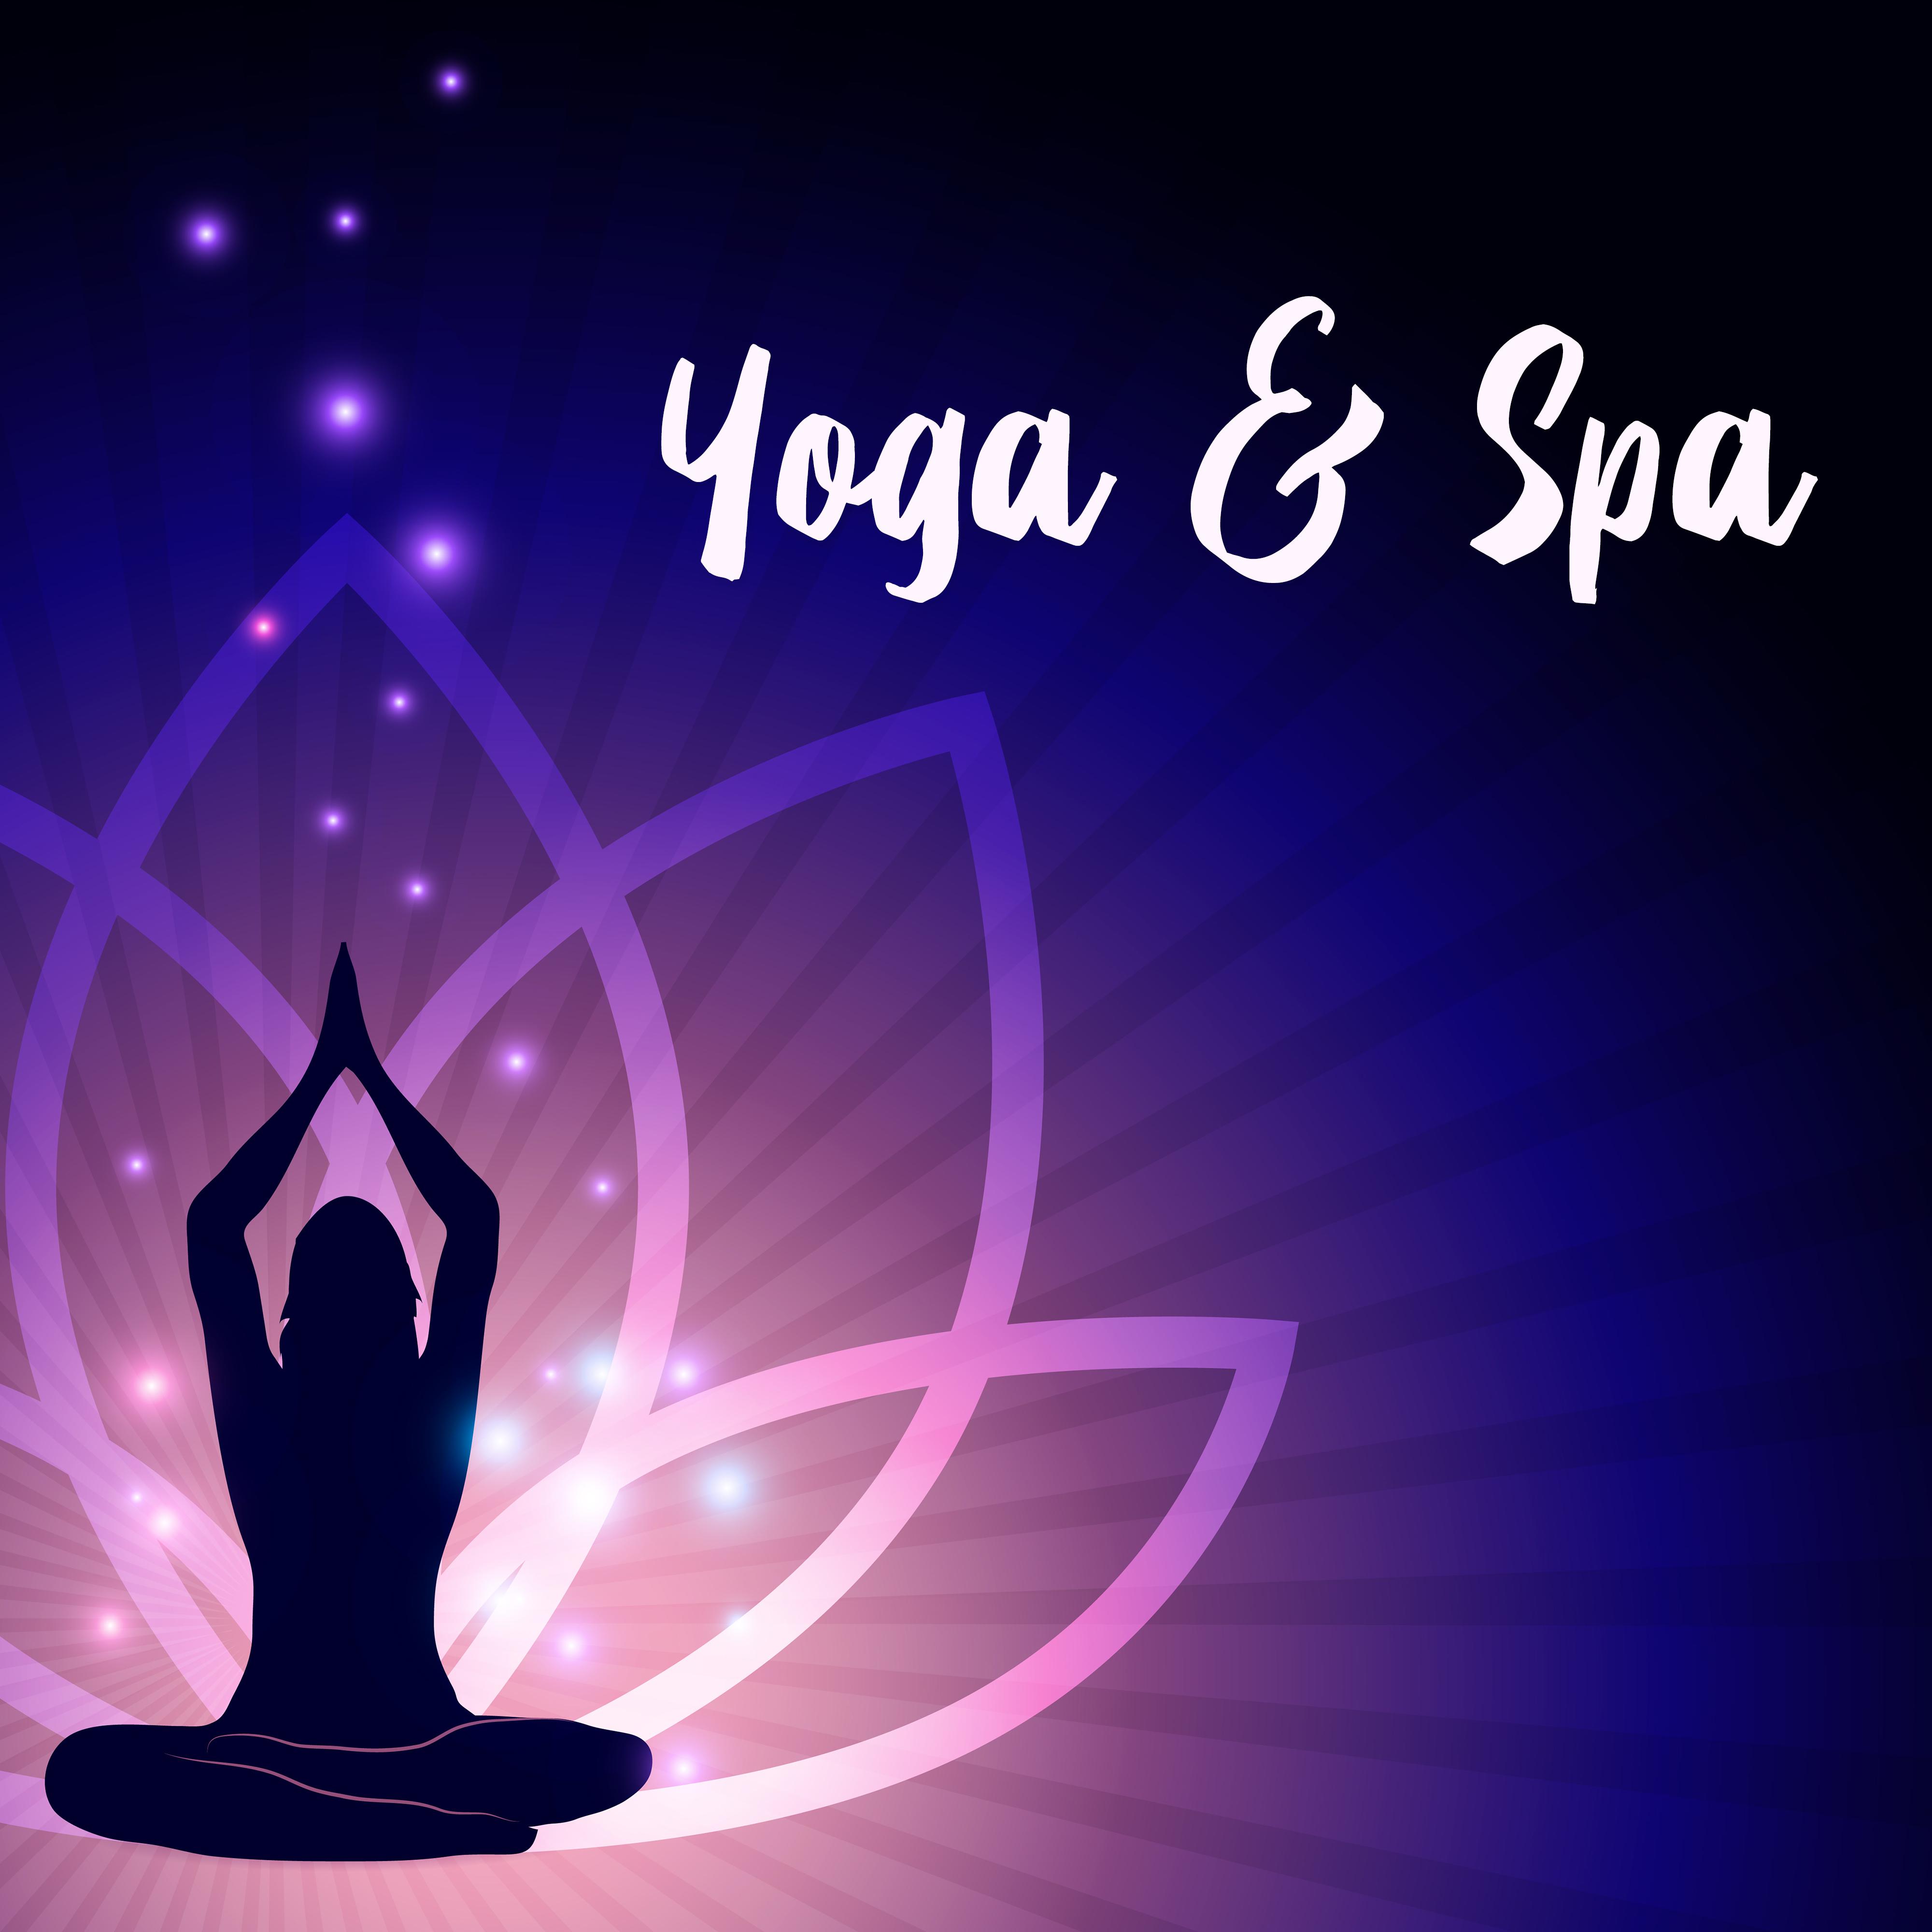 Yoga  Spa  Healing Music for Deep Meditation, Spa, Relax, Sleep, Soothing Massage Music, Mindfulness Relaxation, Deep Zen, Spa Therapy